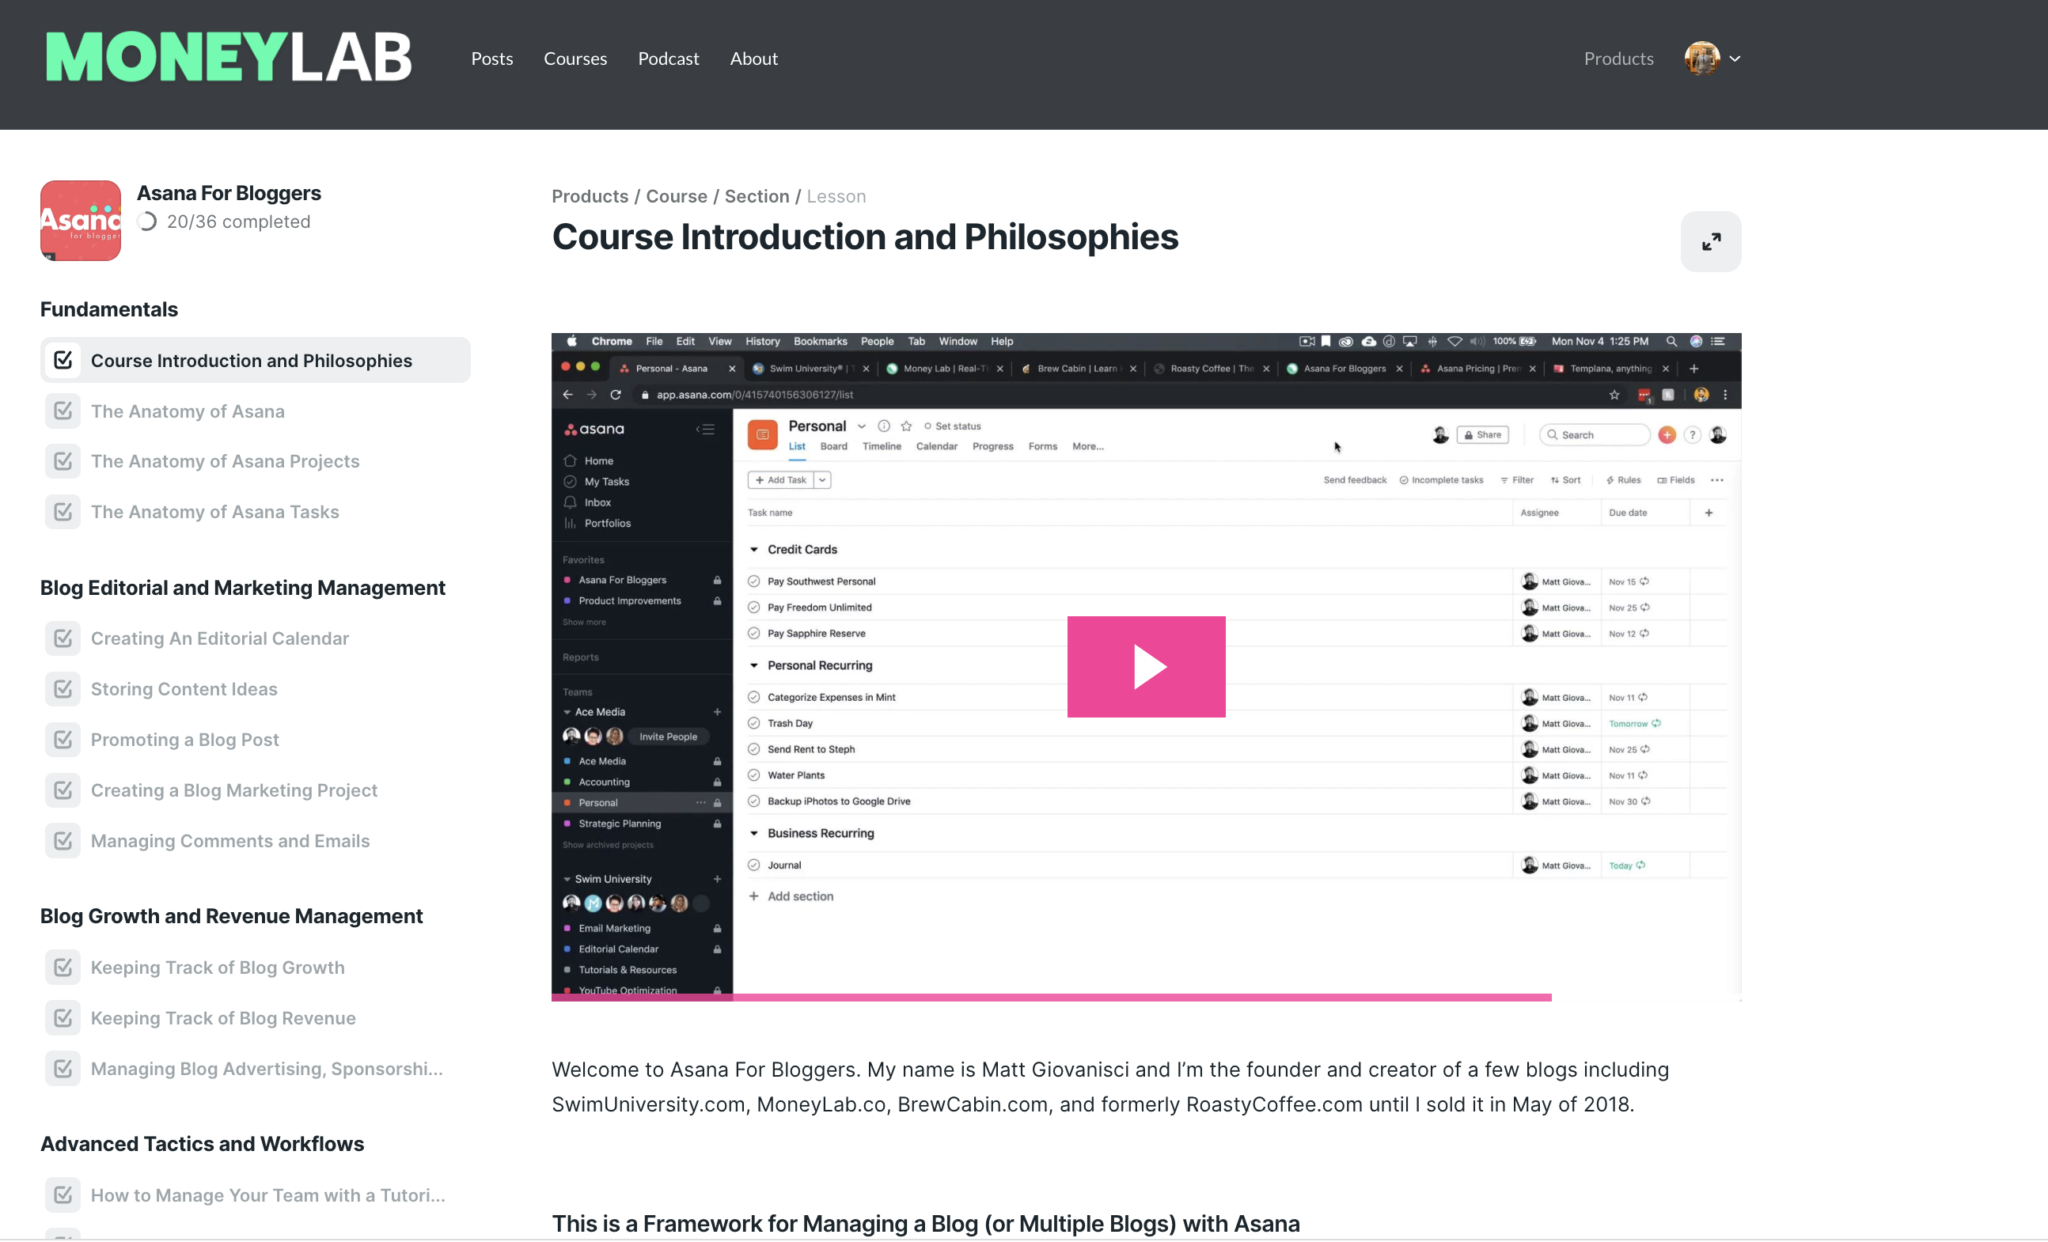 Asana for Bloggers course content